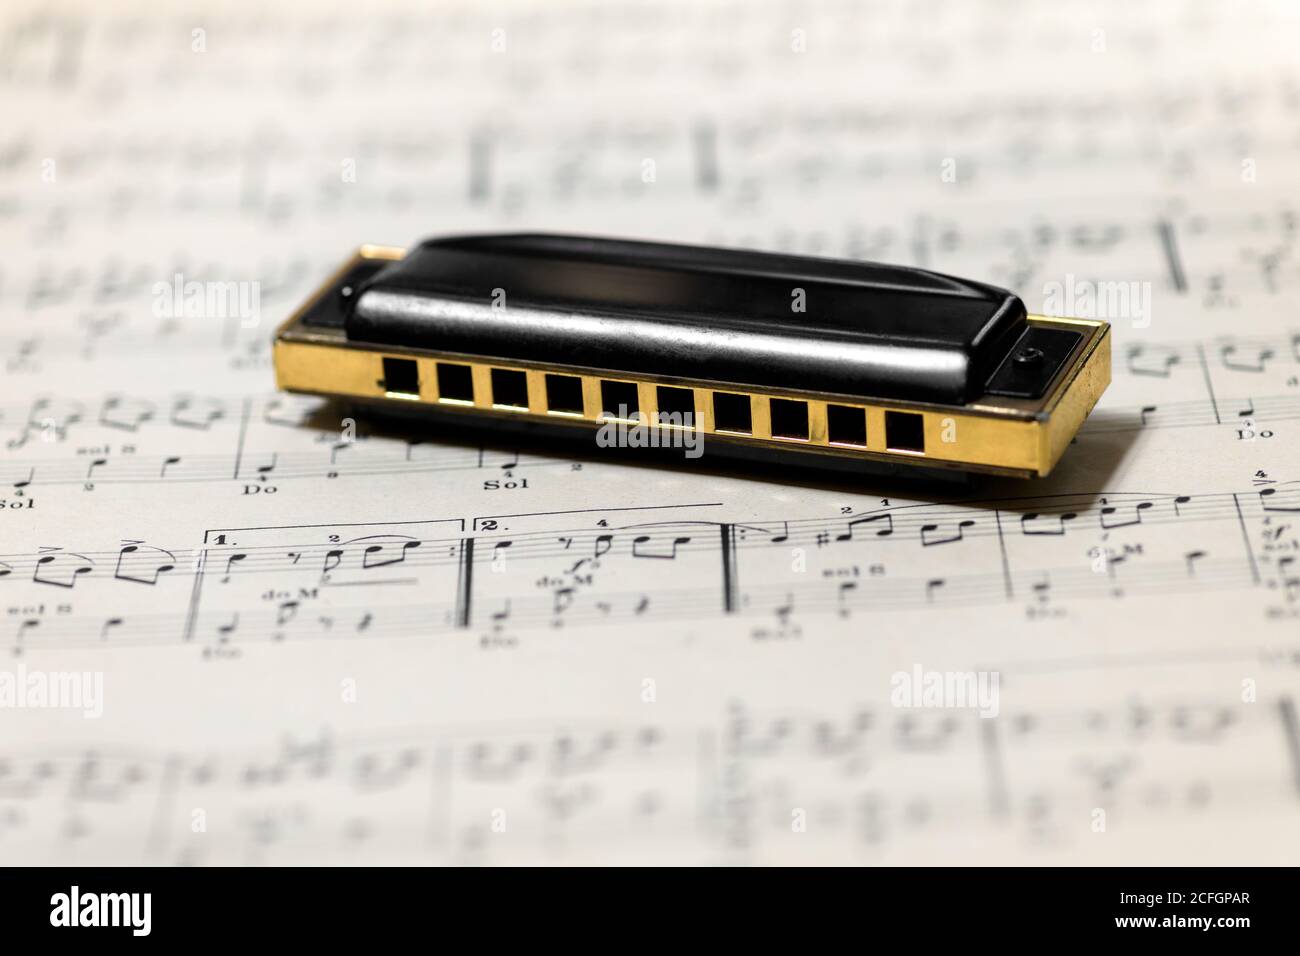 Mouth organ or harmonica on a music score or sheet music with selective focus to the musical instrument and copyspace Stock Photo